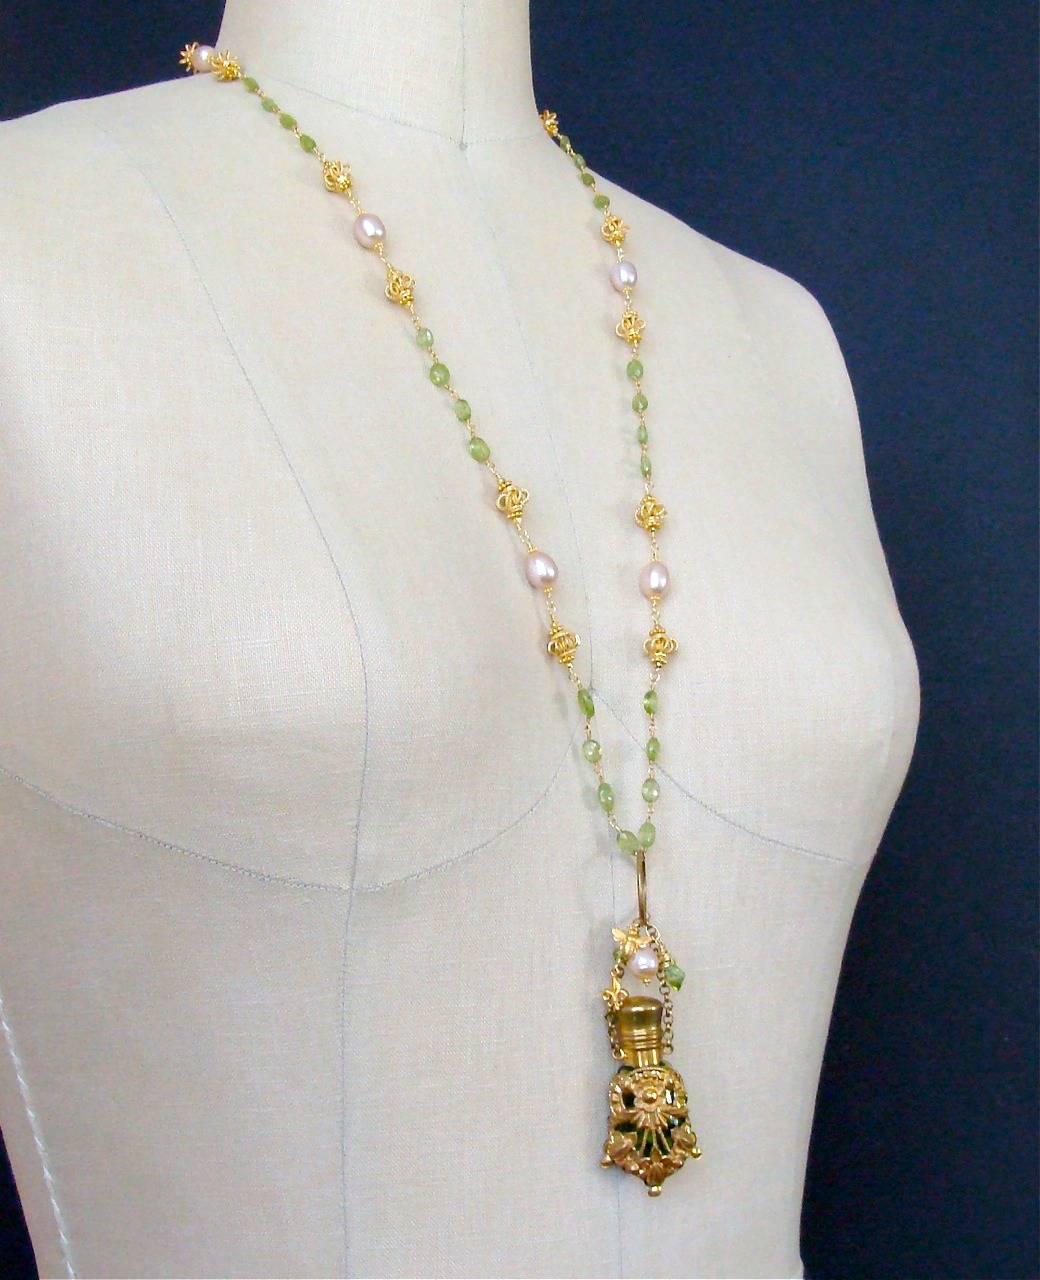 Women's Victorian Chatelaine Scent Bottle Necklace Peridot Pink Pearls